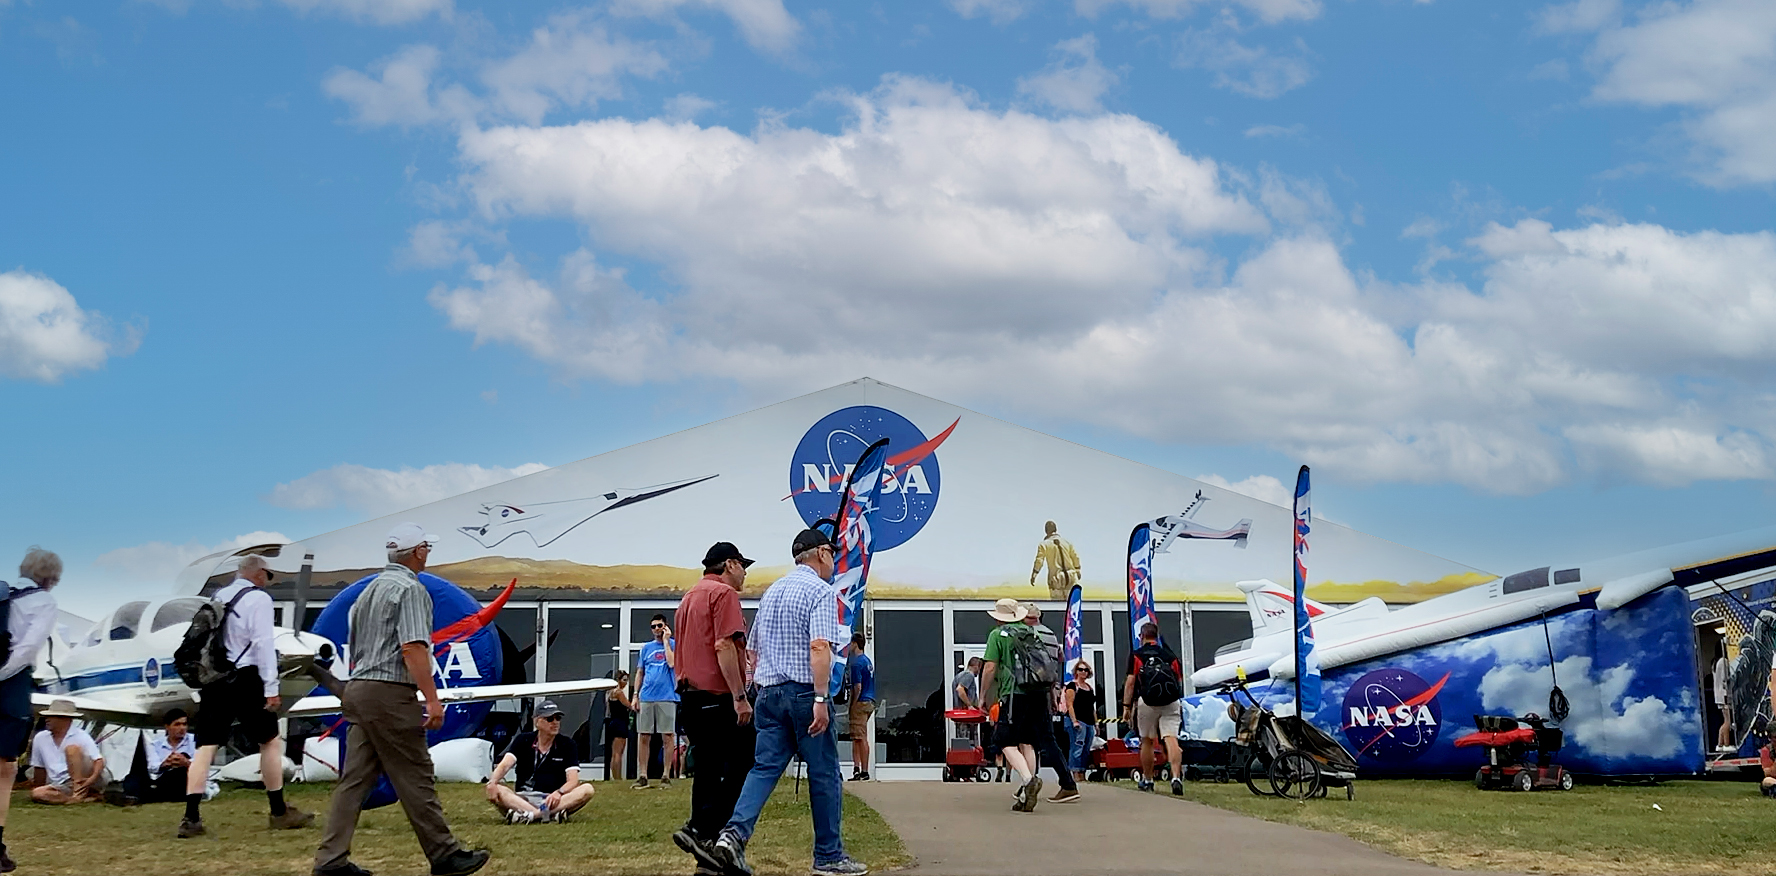 Visitors walking in front of NASA’s pavilion at Experimental Aircraft Association’s AirVenture in Oshkosh, Wisconsin.